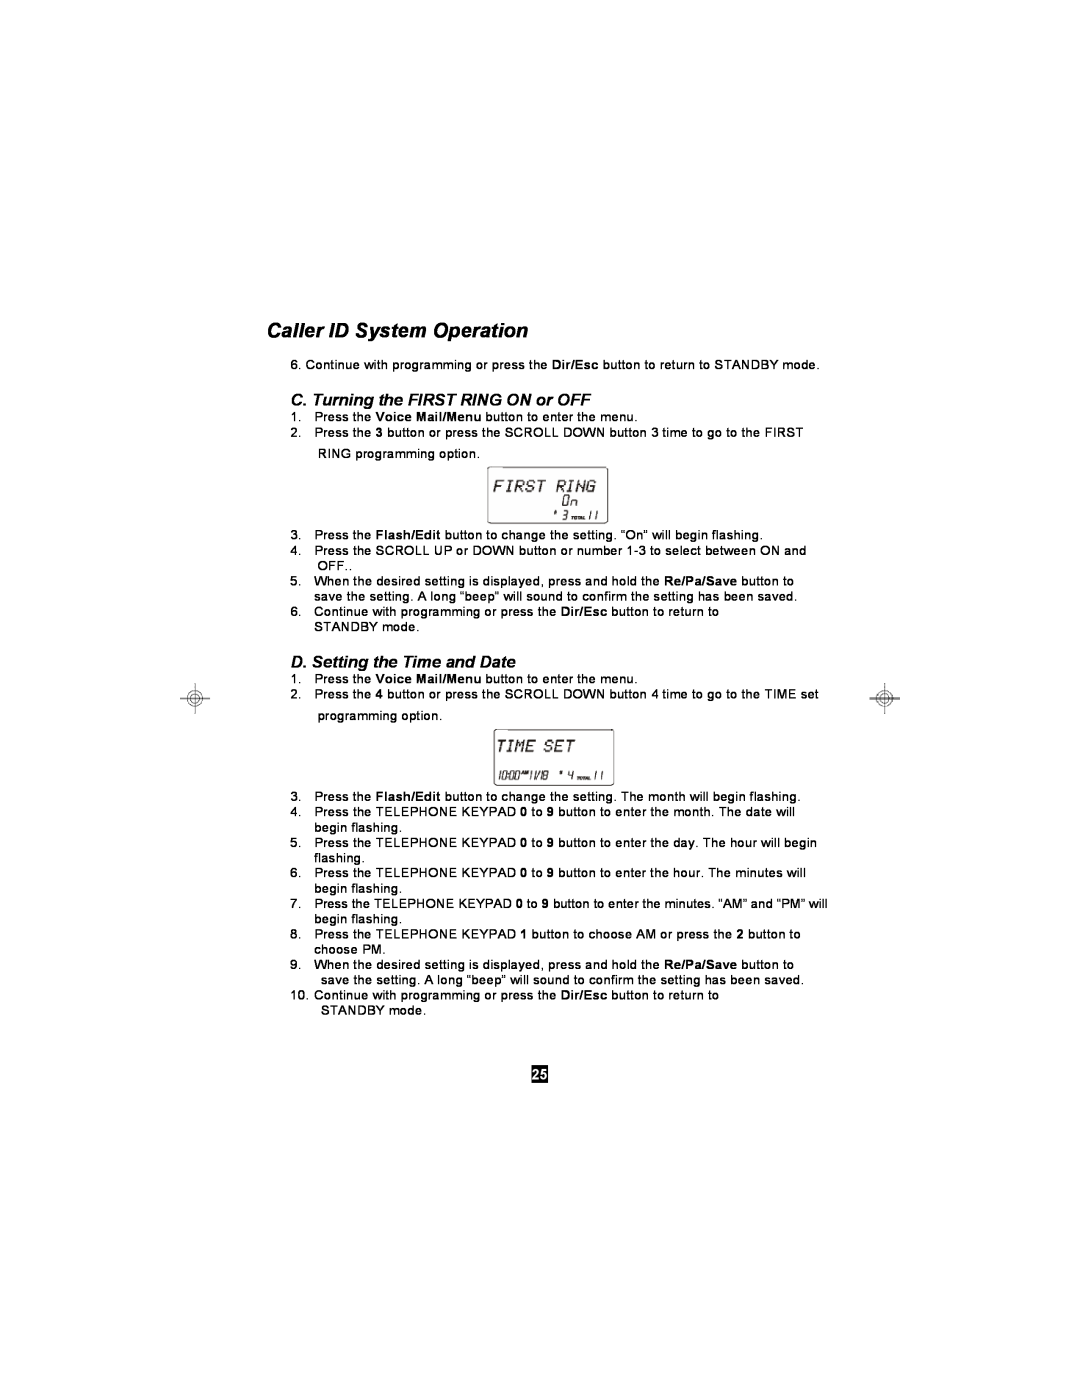 Curtis TC590 owner manual C. Turning the FIRST RING ON or OFF, D. Setting the Time and Date, Caller ID System Operation 